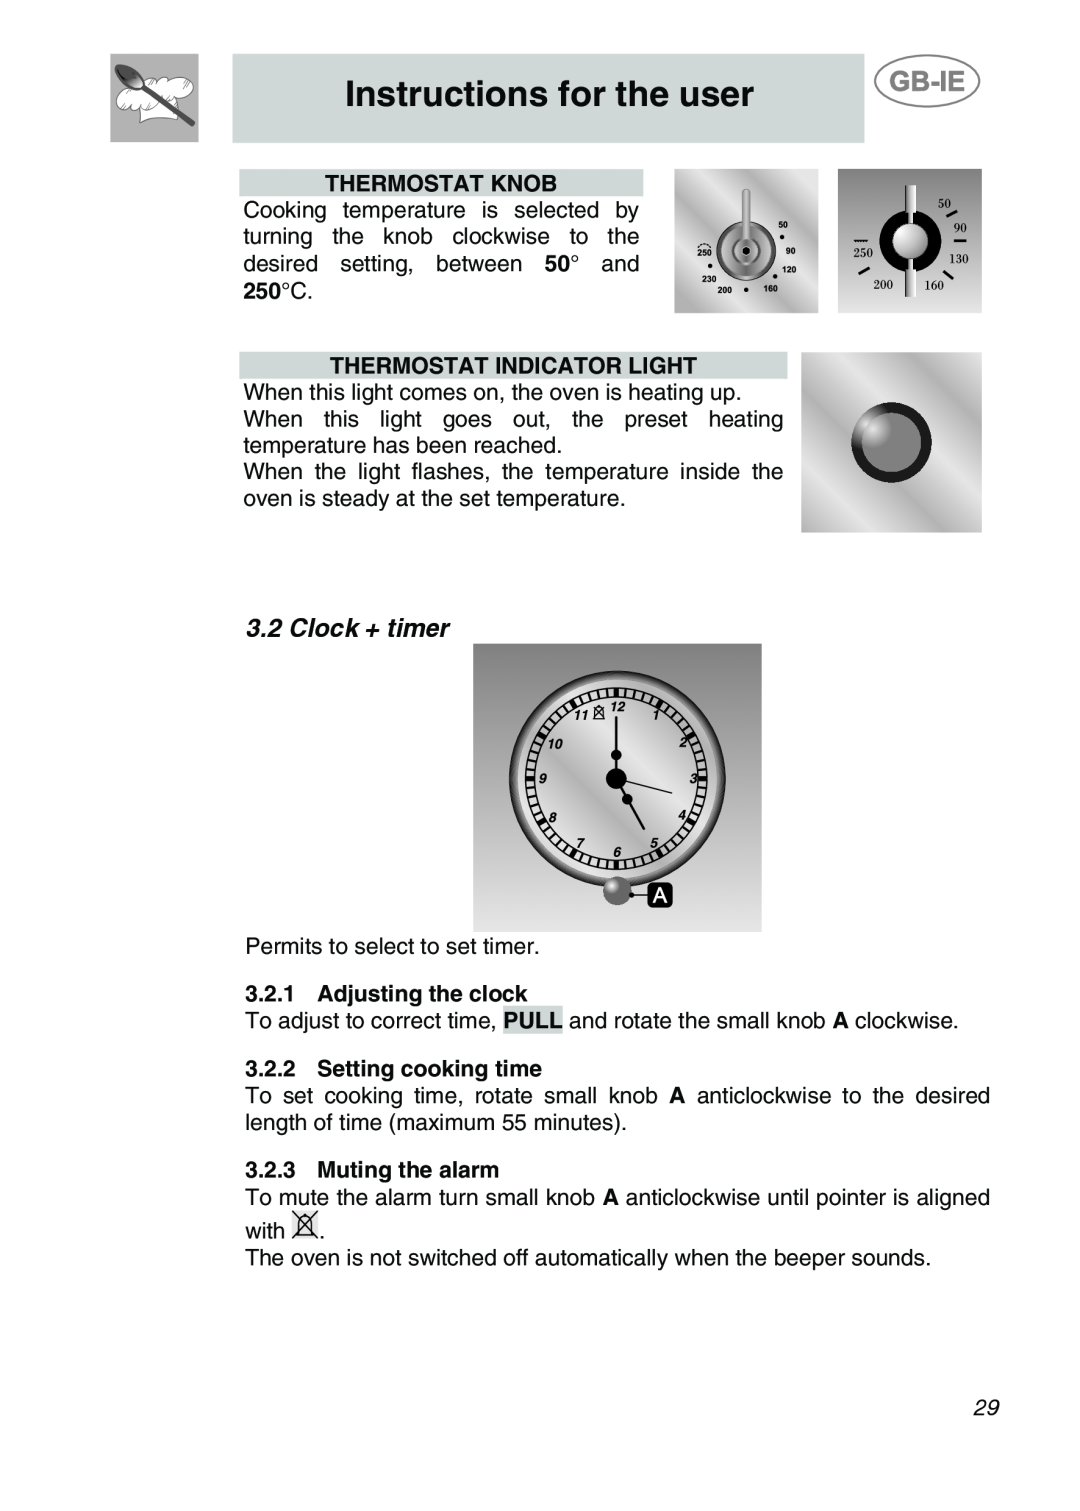 Smeg 9FBYON manual Clock + timer, Instructions for the user, Thermostat Knob, Adjusting the clock, Setting cooking time 